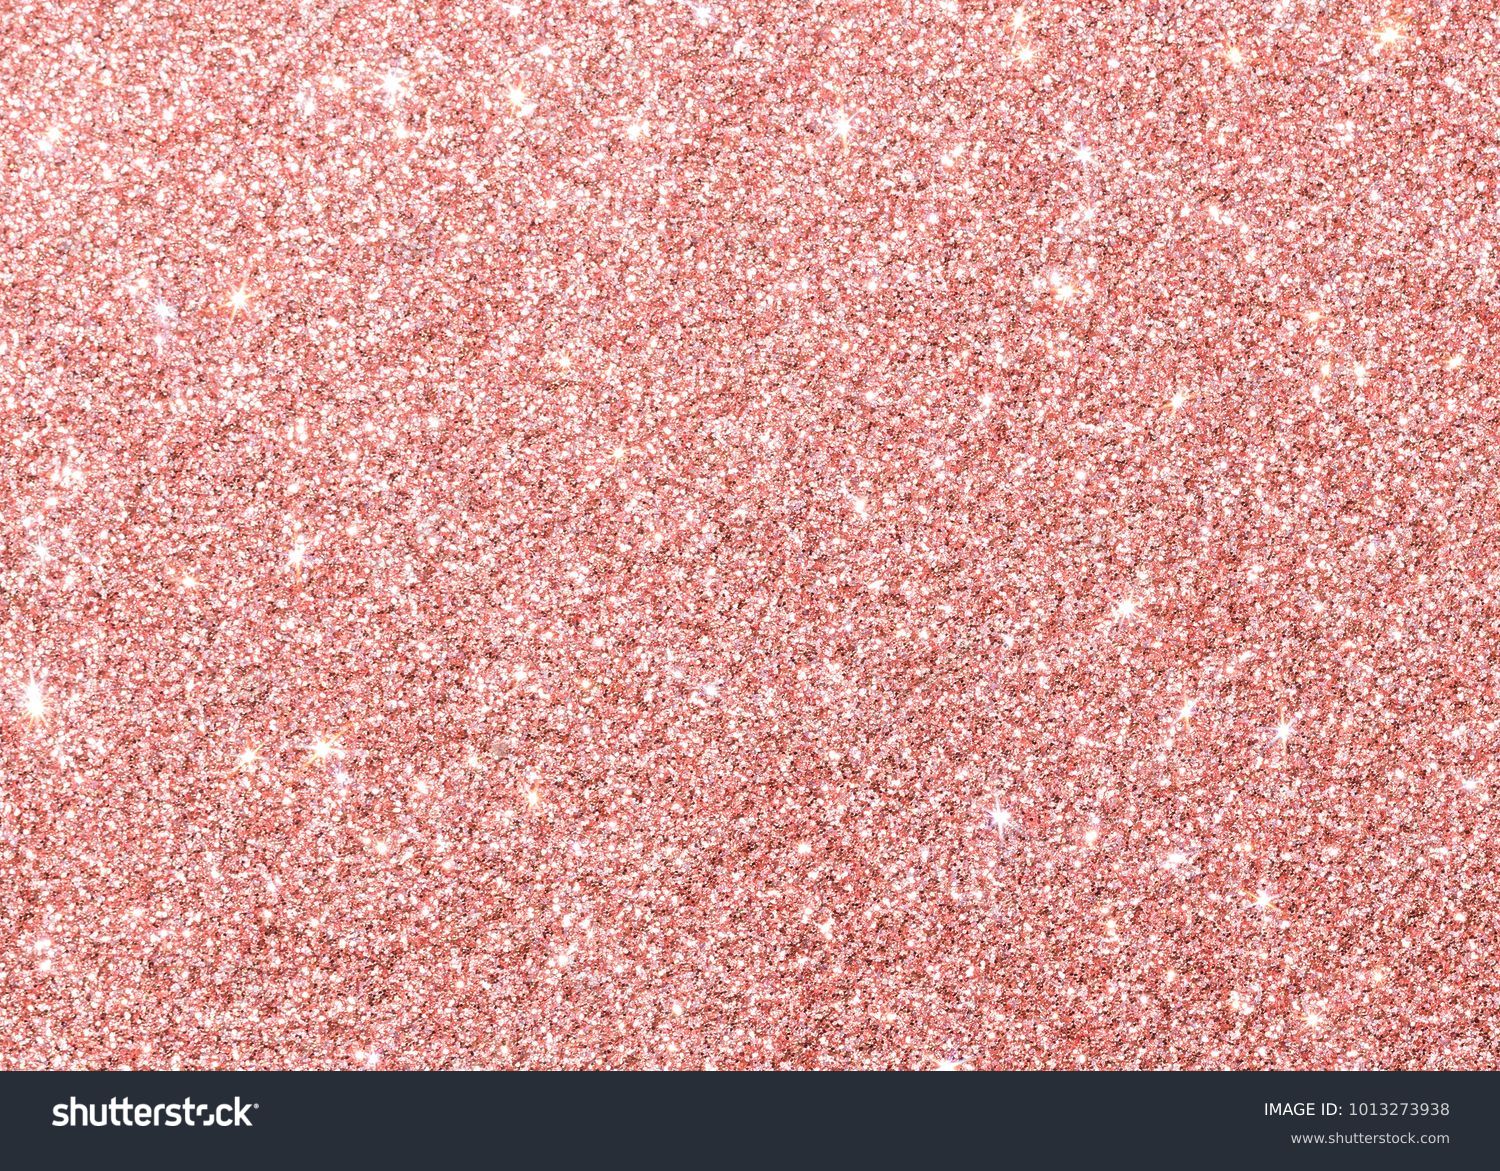 Rose gold pink red glitter background sparkling shiny wrapping paper texture for Christmas holiday seasonal wallpaper decoration, Valentines greeting and wedding invitation card design element #1013273938